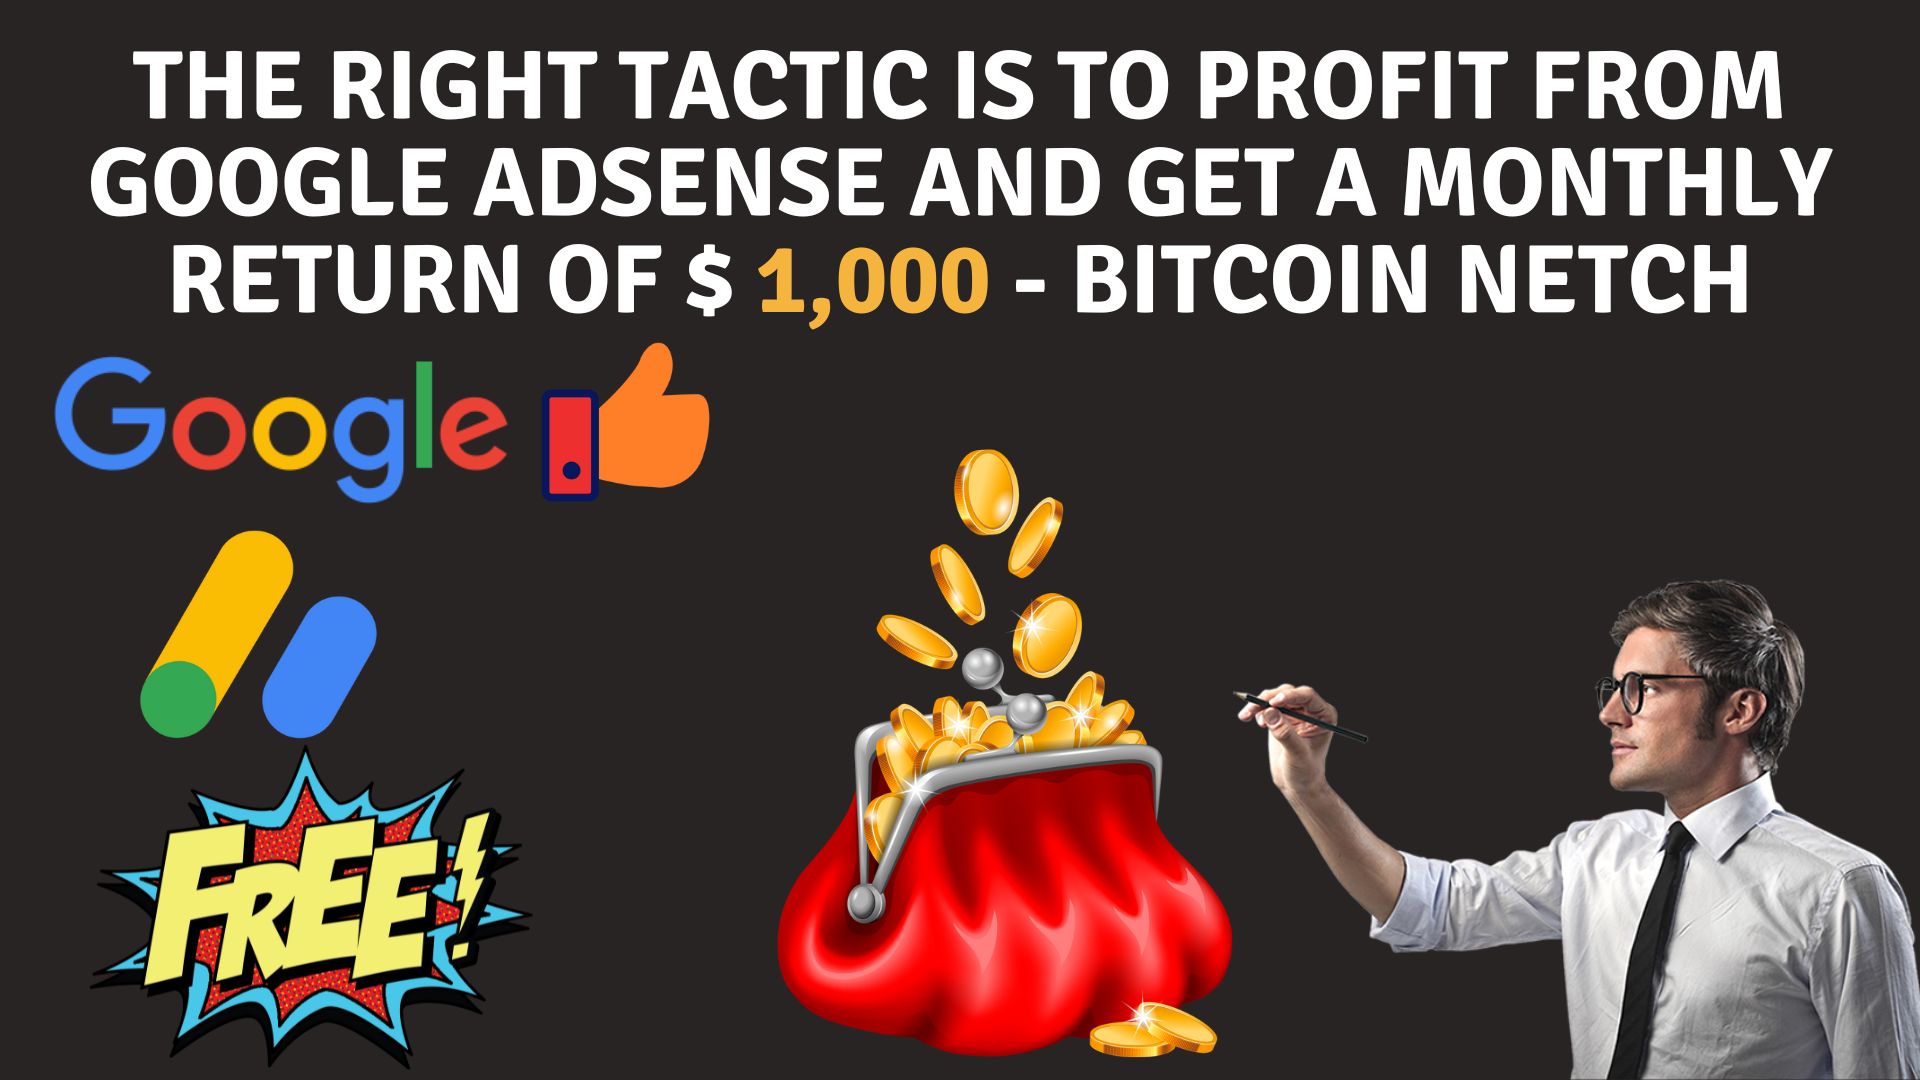 The right tactic is to profit from google adsense and get a monthly return of $ 1,000 - bitcoin netch